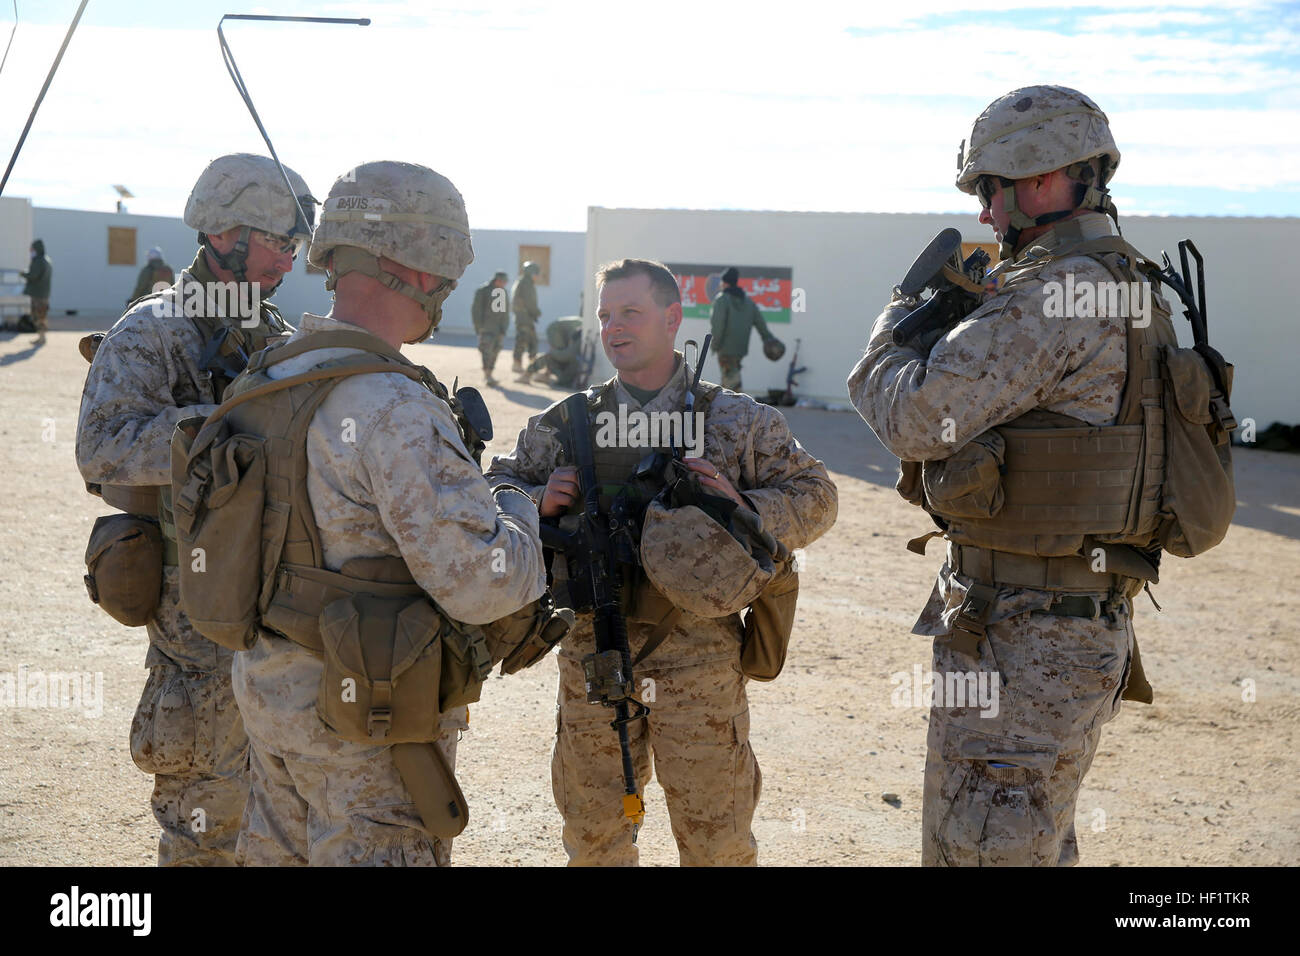 Lieutenant Col. Seth E. Yost, commanding officer, 1st Battalion, 7th Marine Regiment, speaks with company commanders during a counterinsurgency exercise on Range 220 at Marine Corps Air Ground Combat Center Twentynine Palms, Calif., Dec. 9, 2013. The $140 million urban warfare training facility consists of more than 1,000 buildings and is divided into four sectors. The buildings replicate what can be found in an urban town to include gas stations, factories, one story complexes, marketplaces and multiple story buildings. The battalion is slated to continue a vigorous training schedule before d Stock Photo